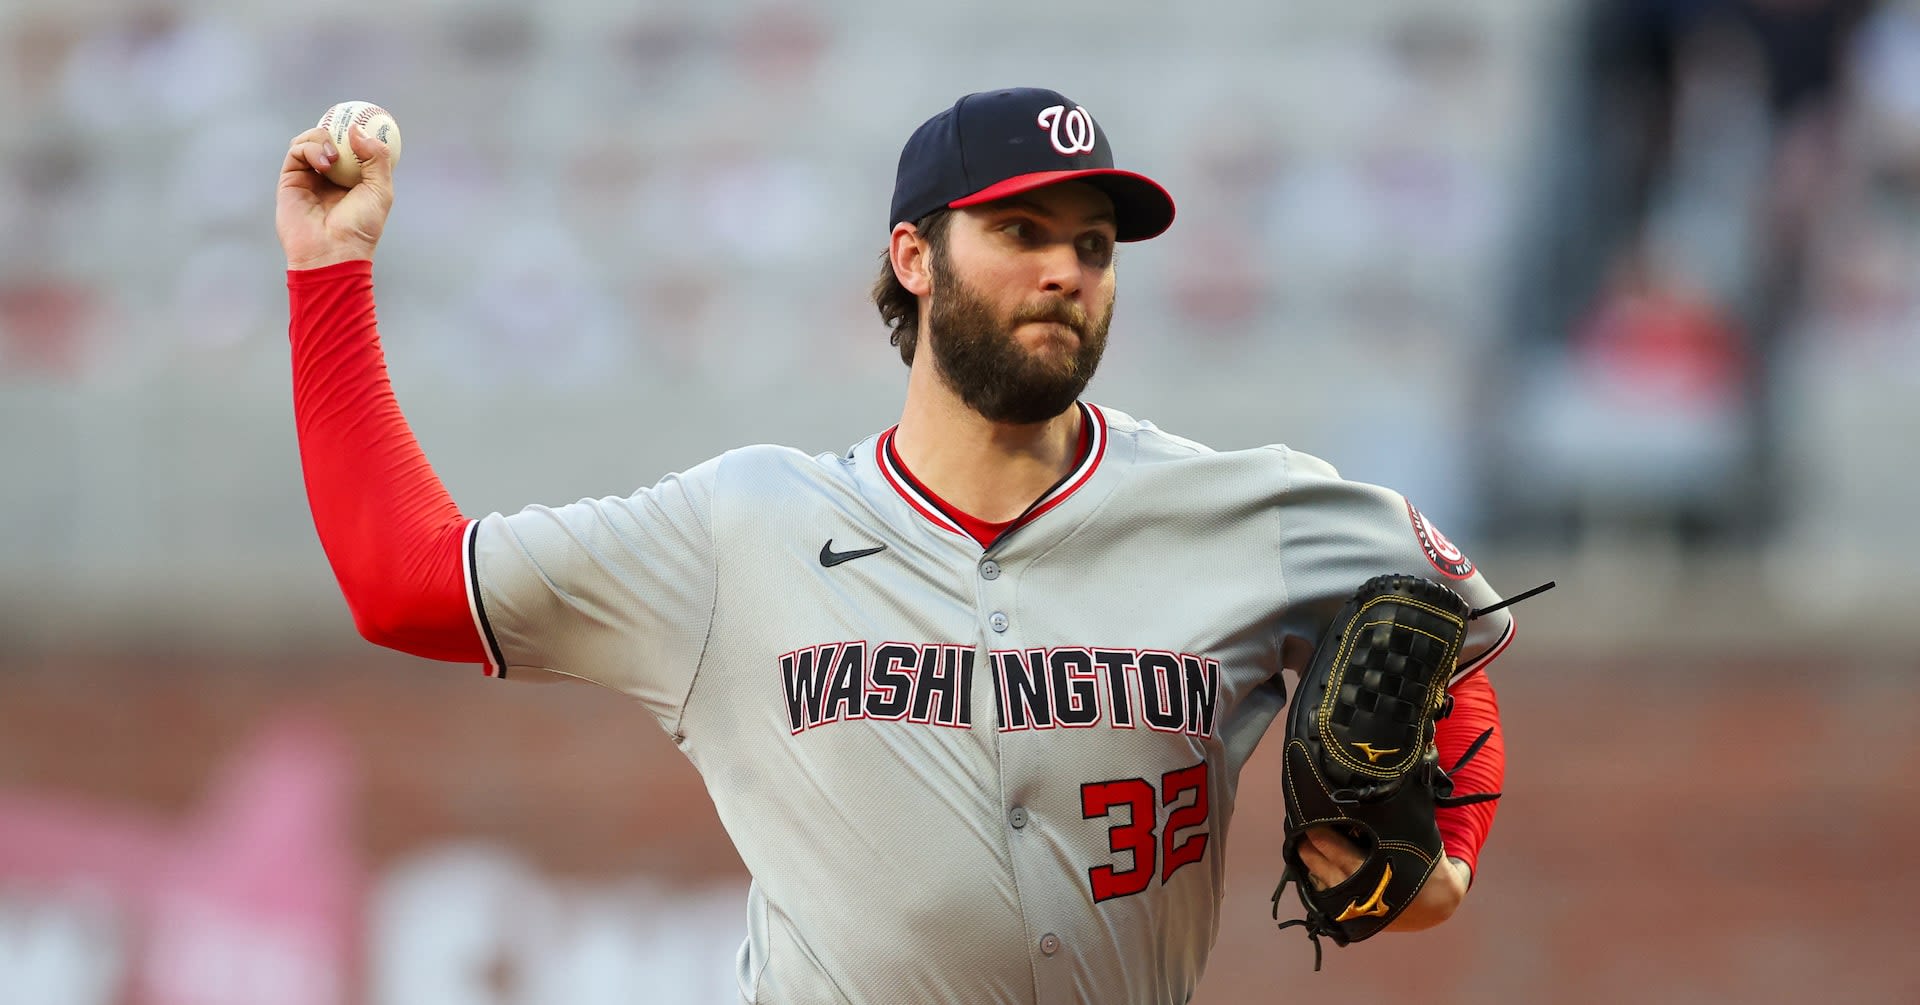 MLB roundup: Nats' Trevor Williams beats Braves, stays undefeated